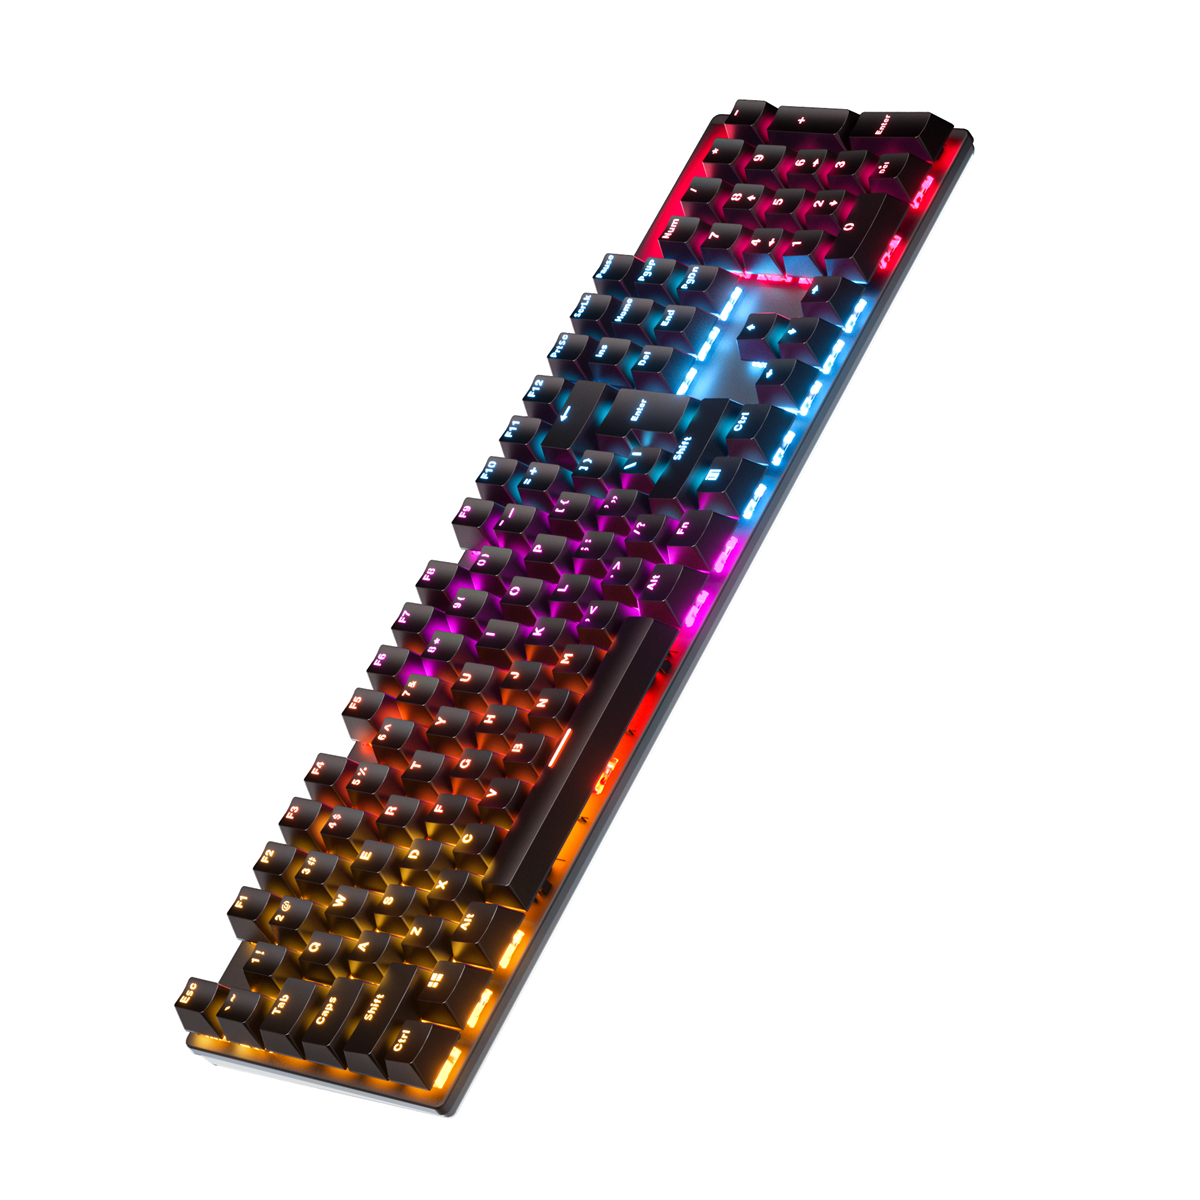 Find KA101 Mechanical Gaming Keyboard 104 Keys XA Profile PBT Double shot Molding Keycaps Blue Switch RGB Backlit USB Wired Keyboard for Sale on Gipsybee.com with cryptocurrencies